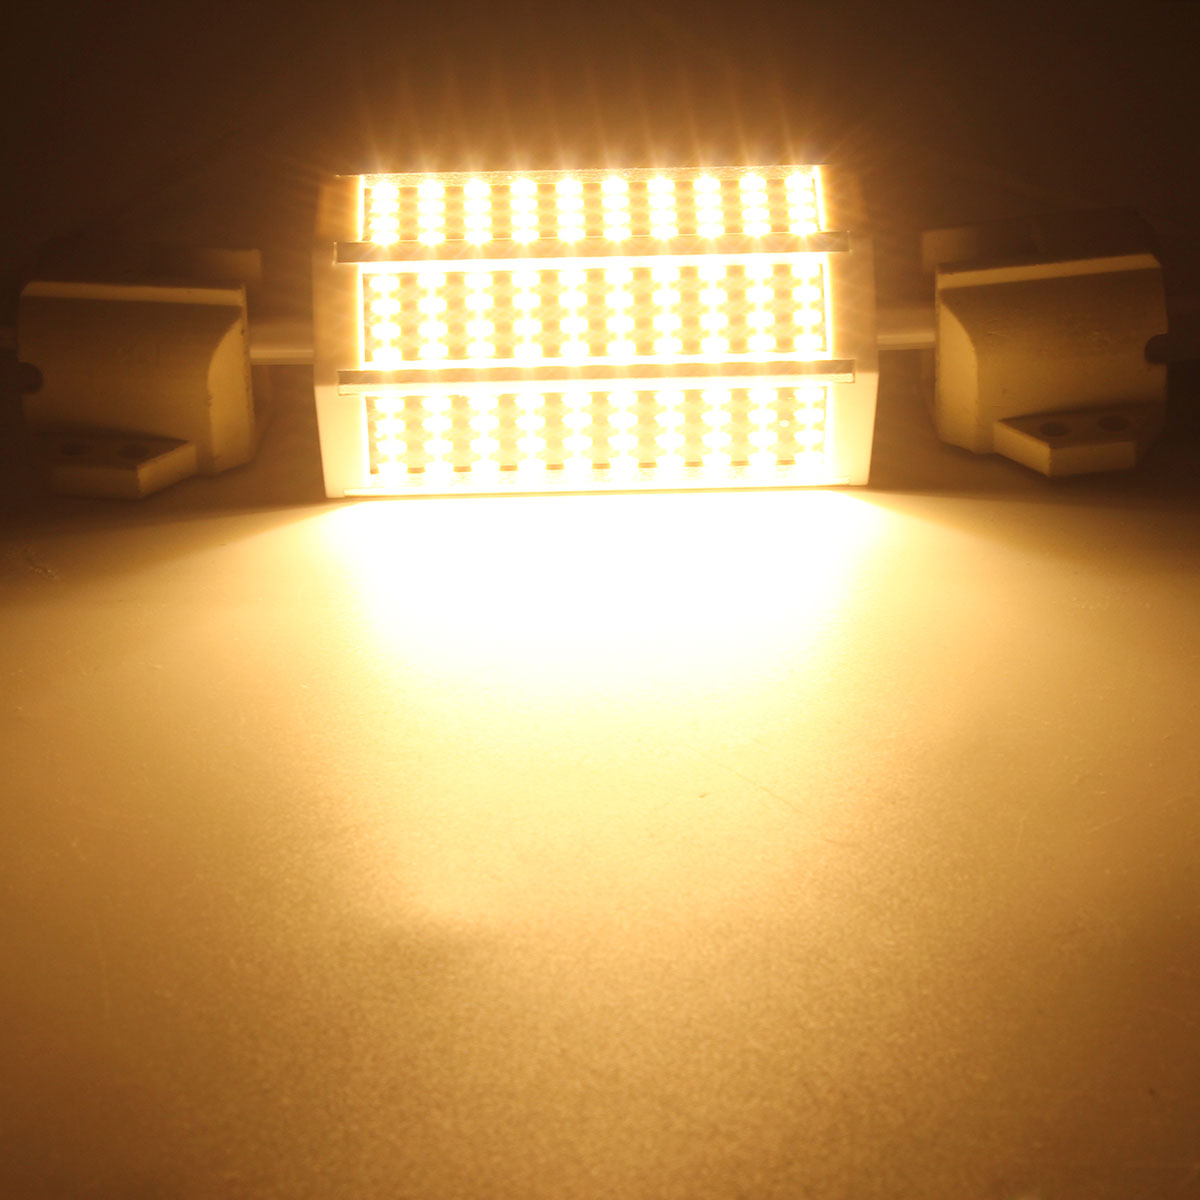 Dimmable-R7S-118mm-15W-120-SMD-4014-LED-Warm-White-Pure-White-Light-Lamp-Bulb-AC220V110V-1059884-3